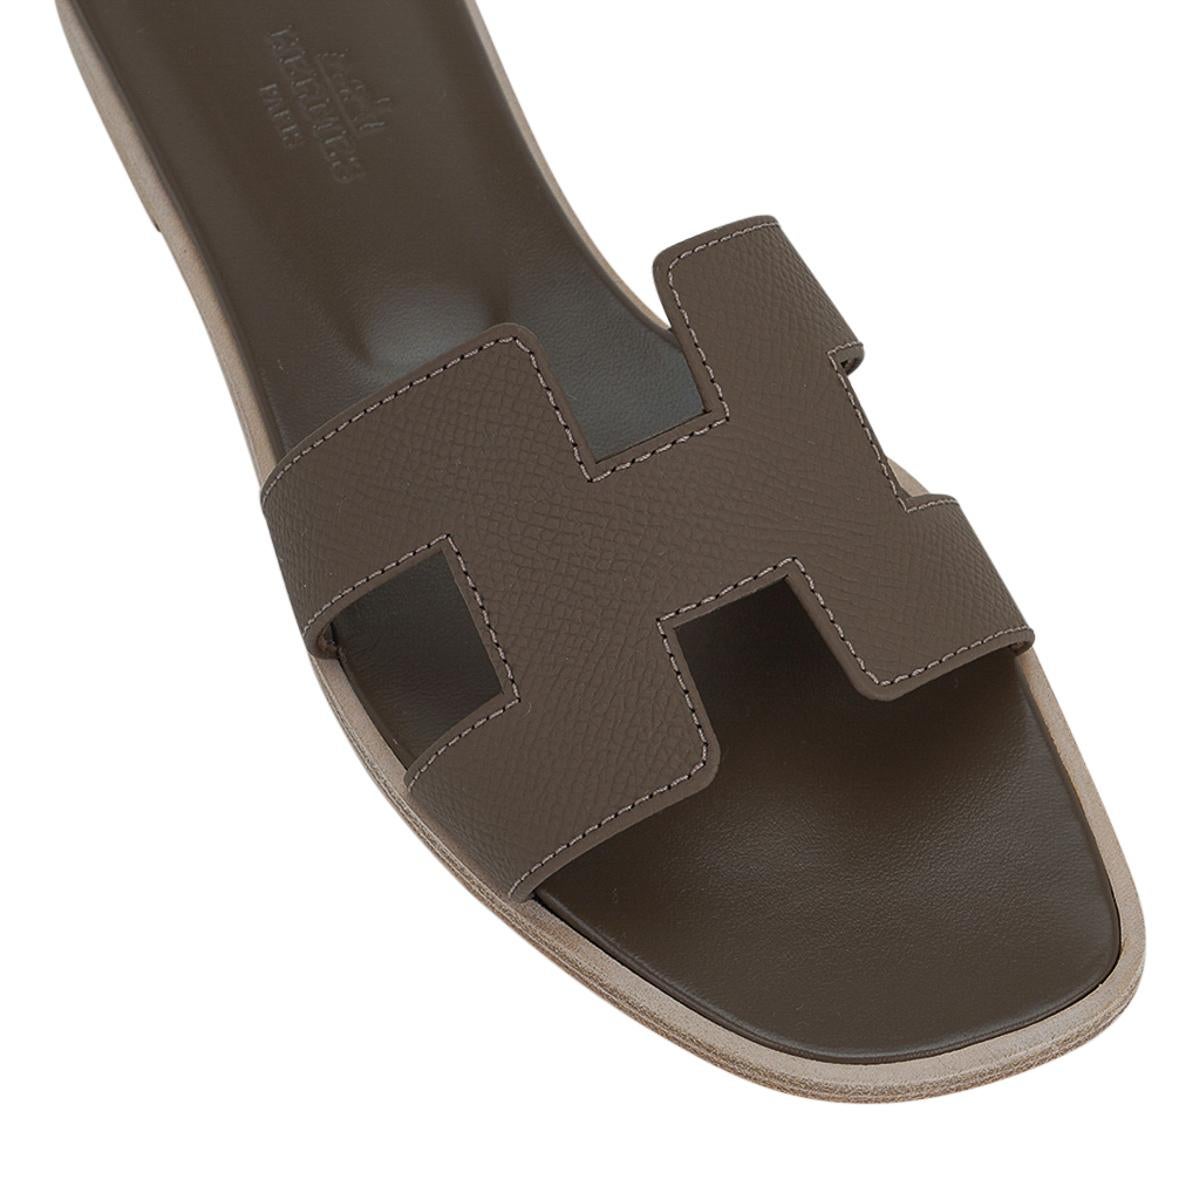 Mightychic offers Hermes Oran sandal shoes featured in neutral Etoupe Epsom leather. 
The iconic top stitched H cutout over the top of the slide.
Matching embossed calfskin insole.
Wood heel with leather sole.
Comes with sleepers and signature